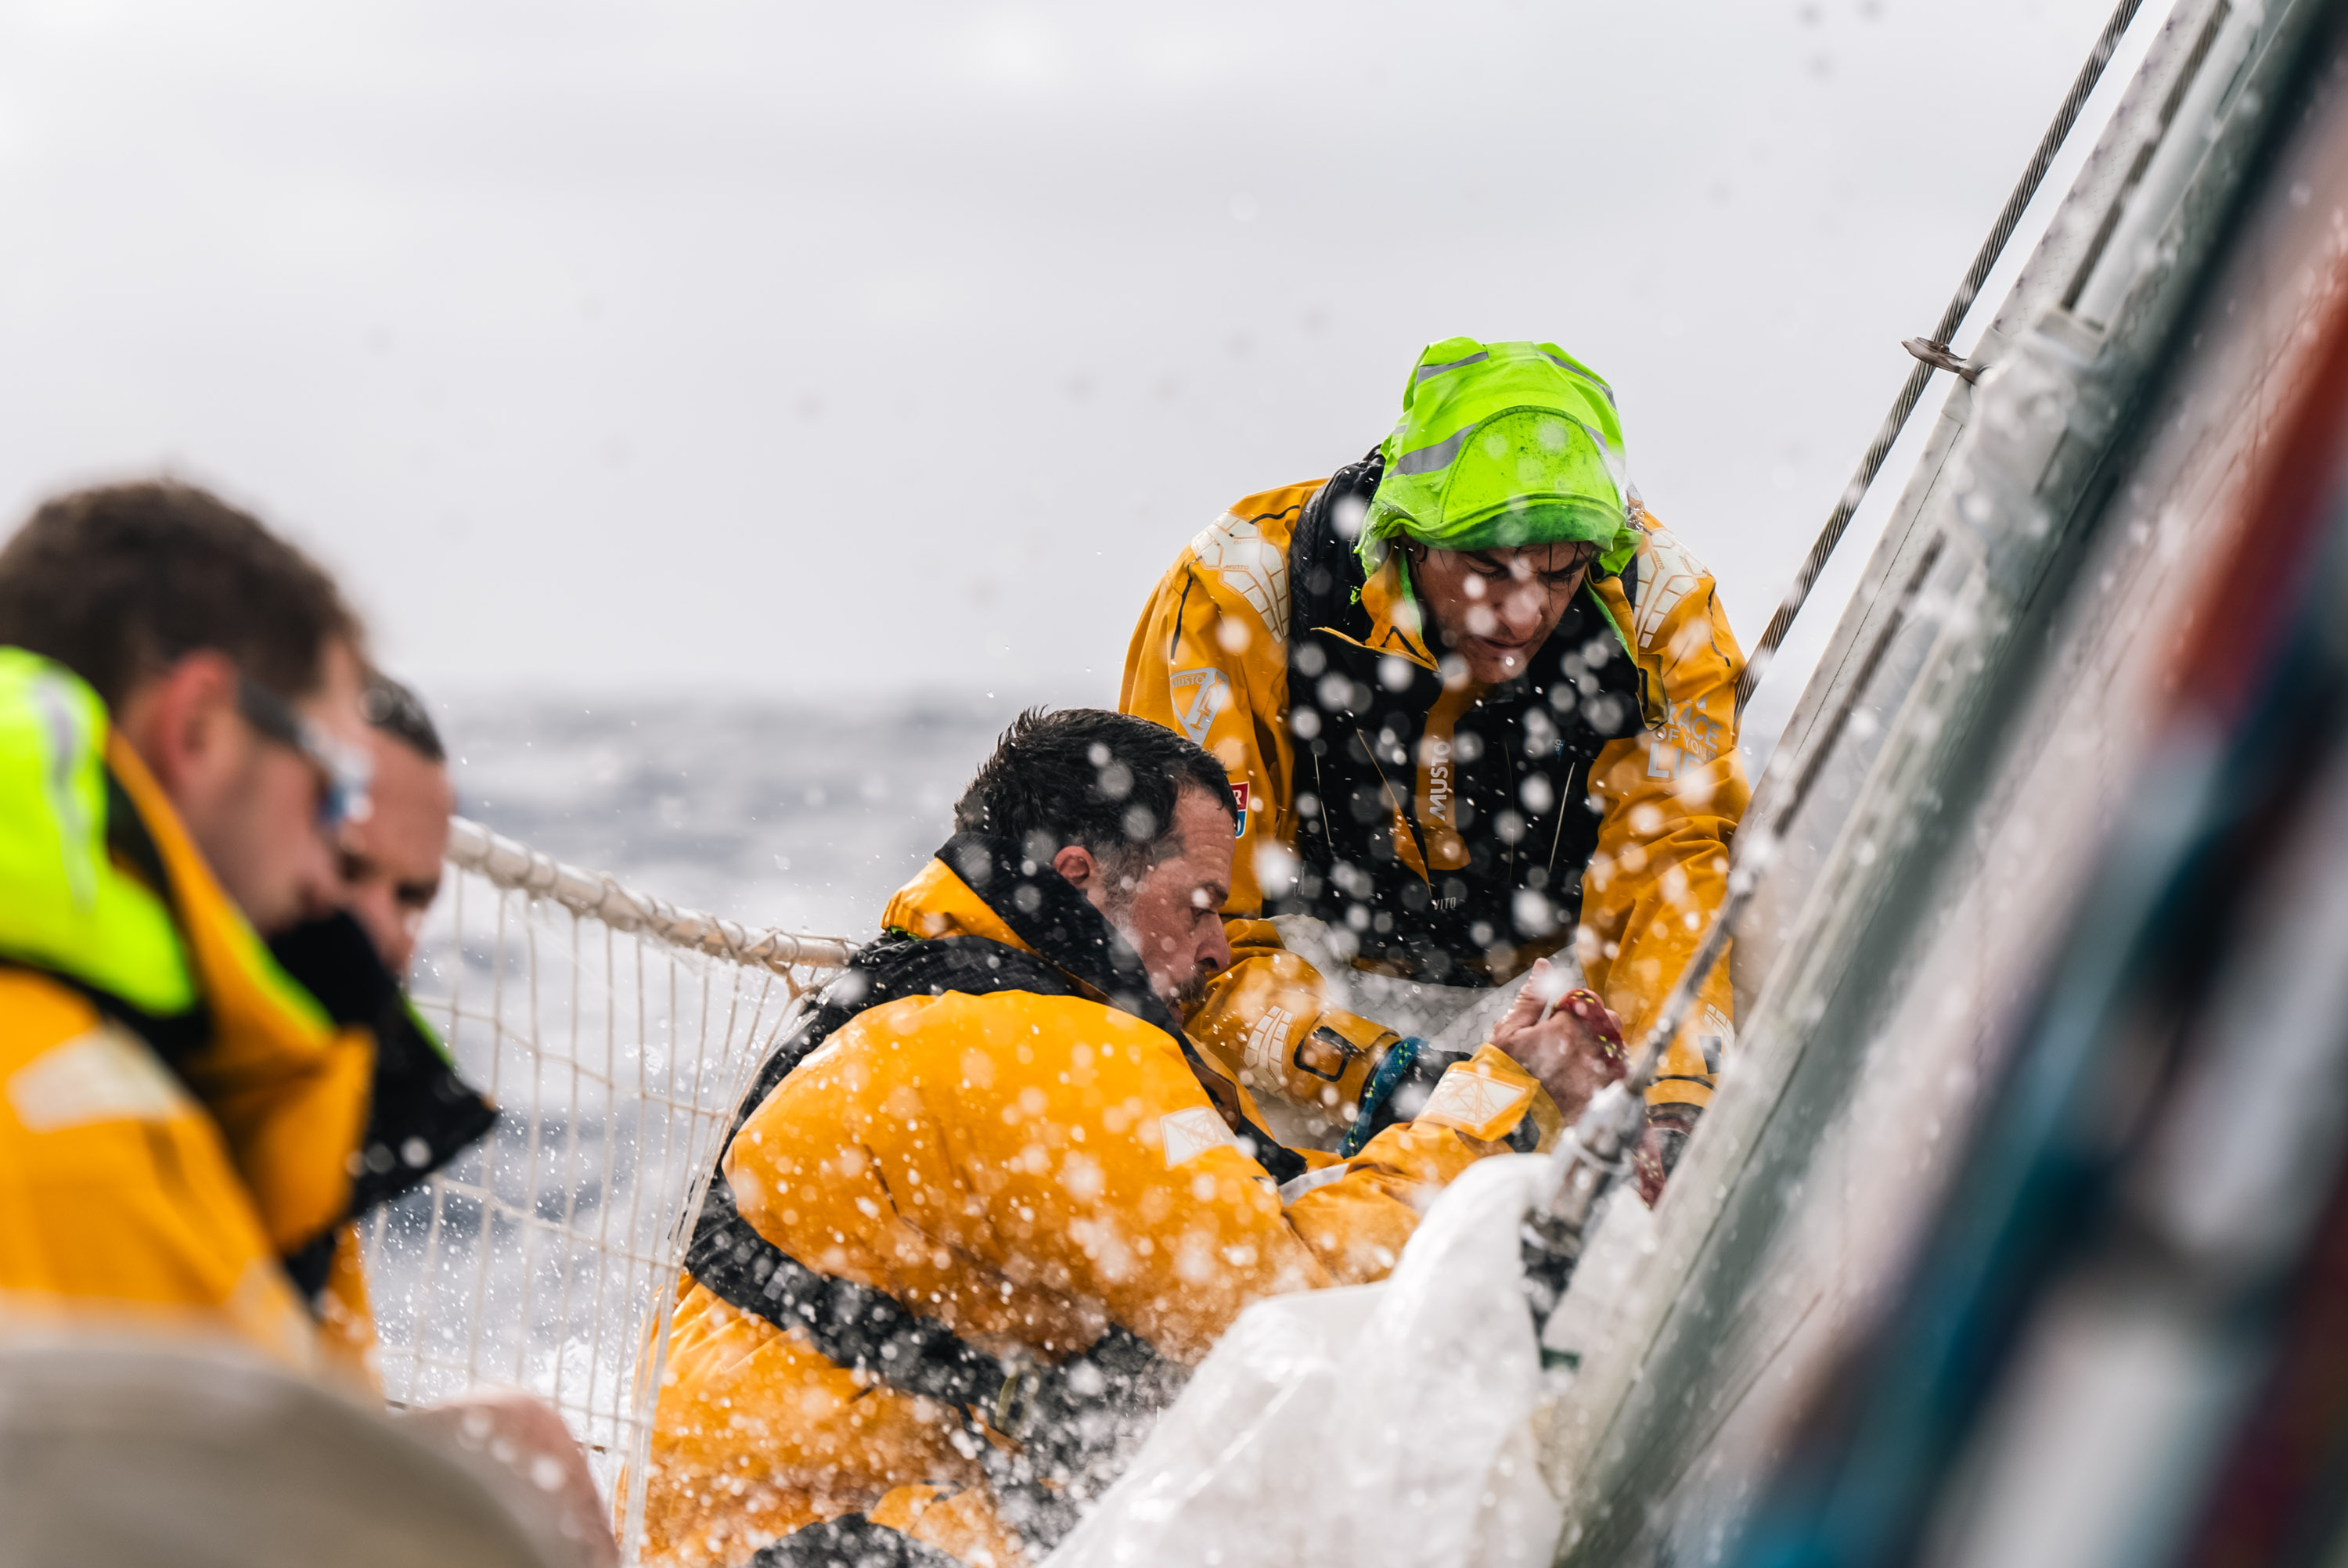 Clipper Race Crew in action